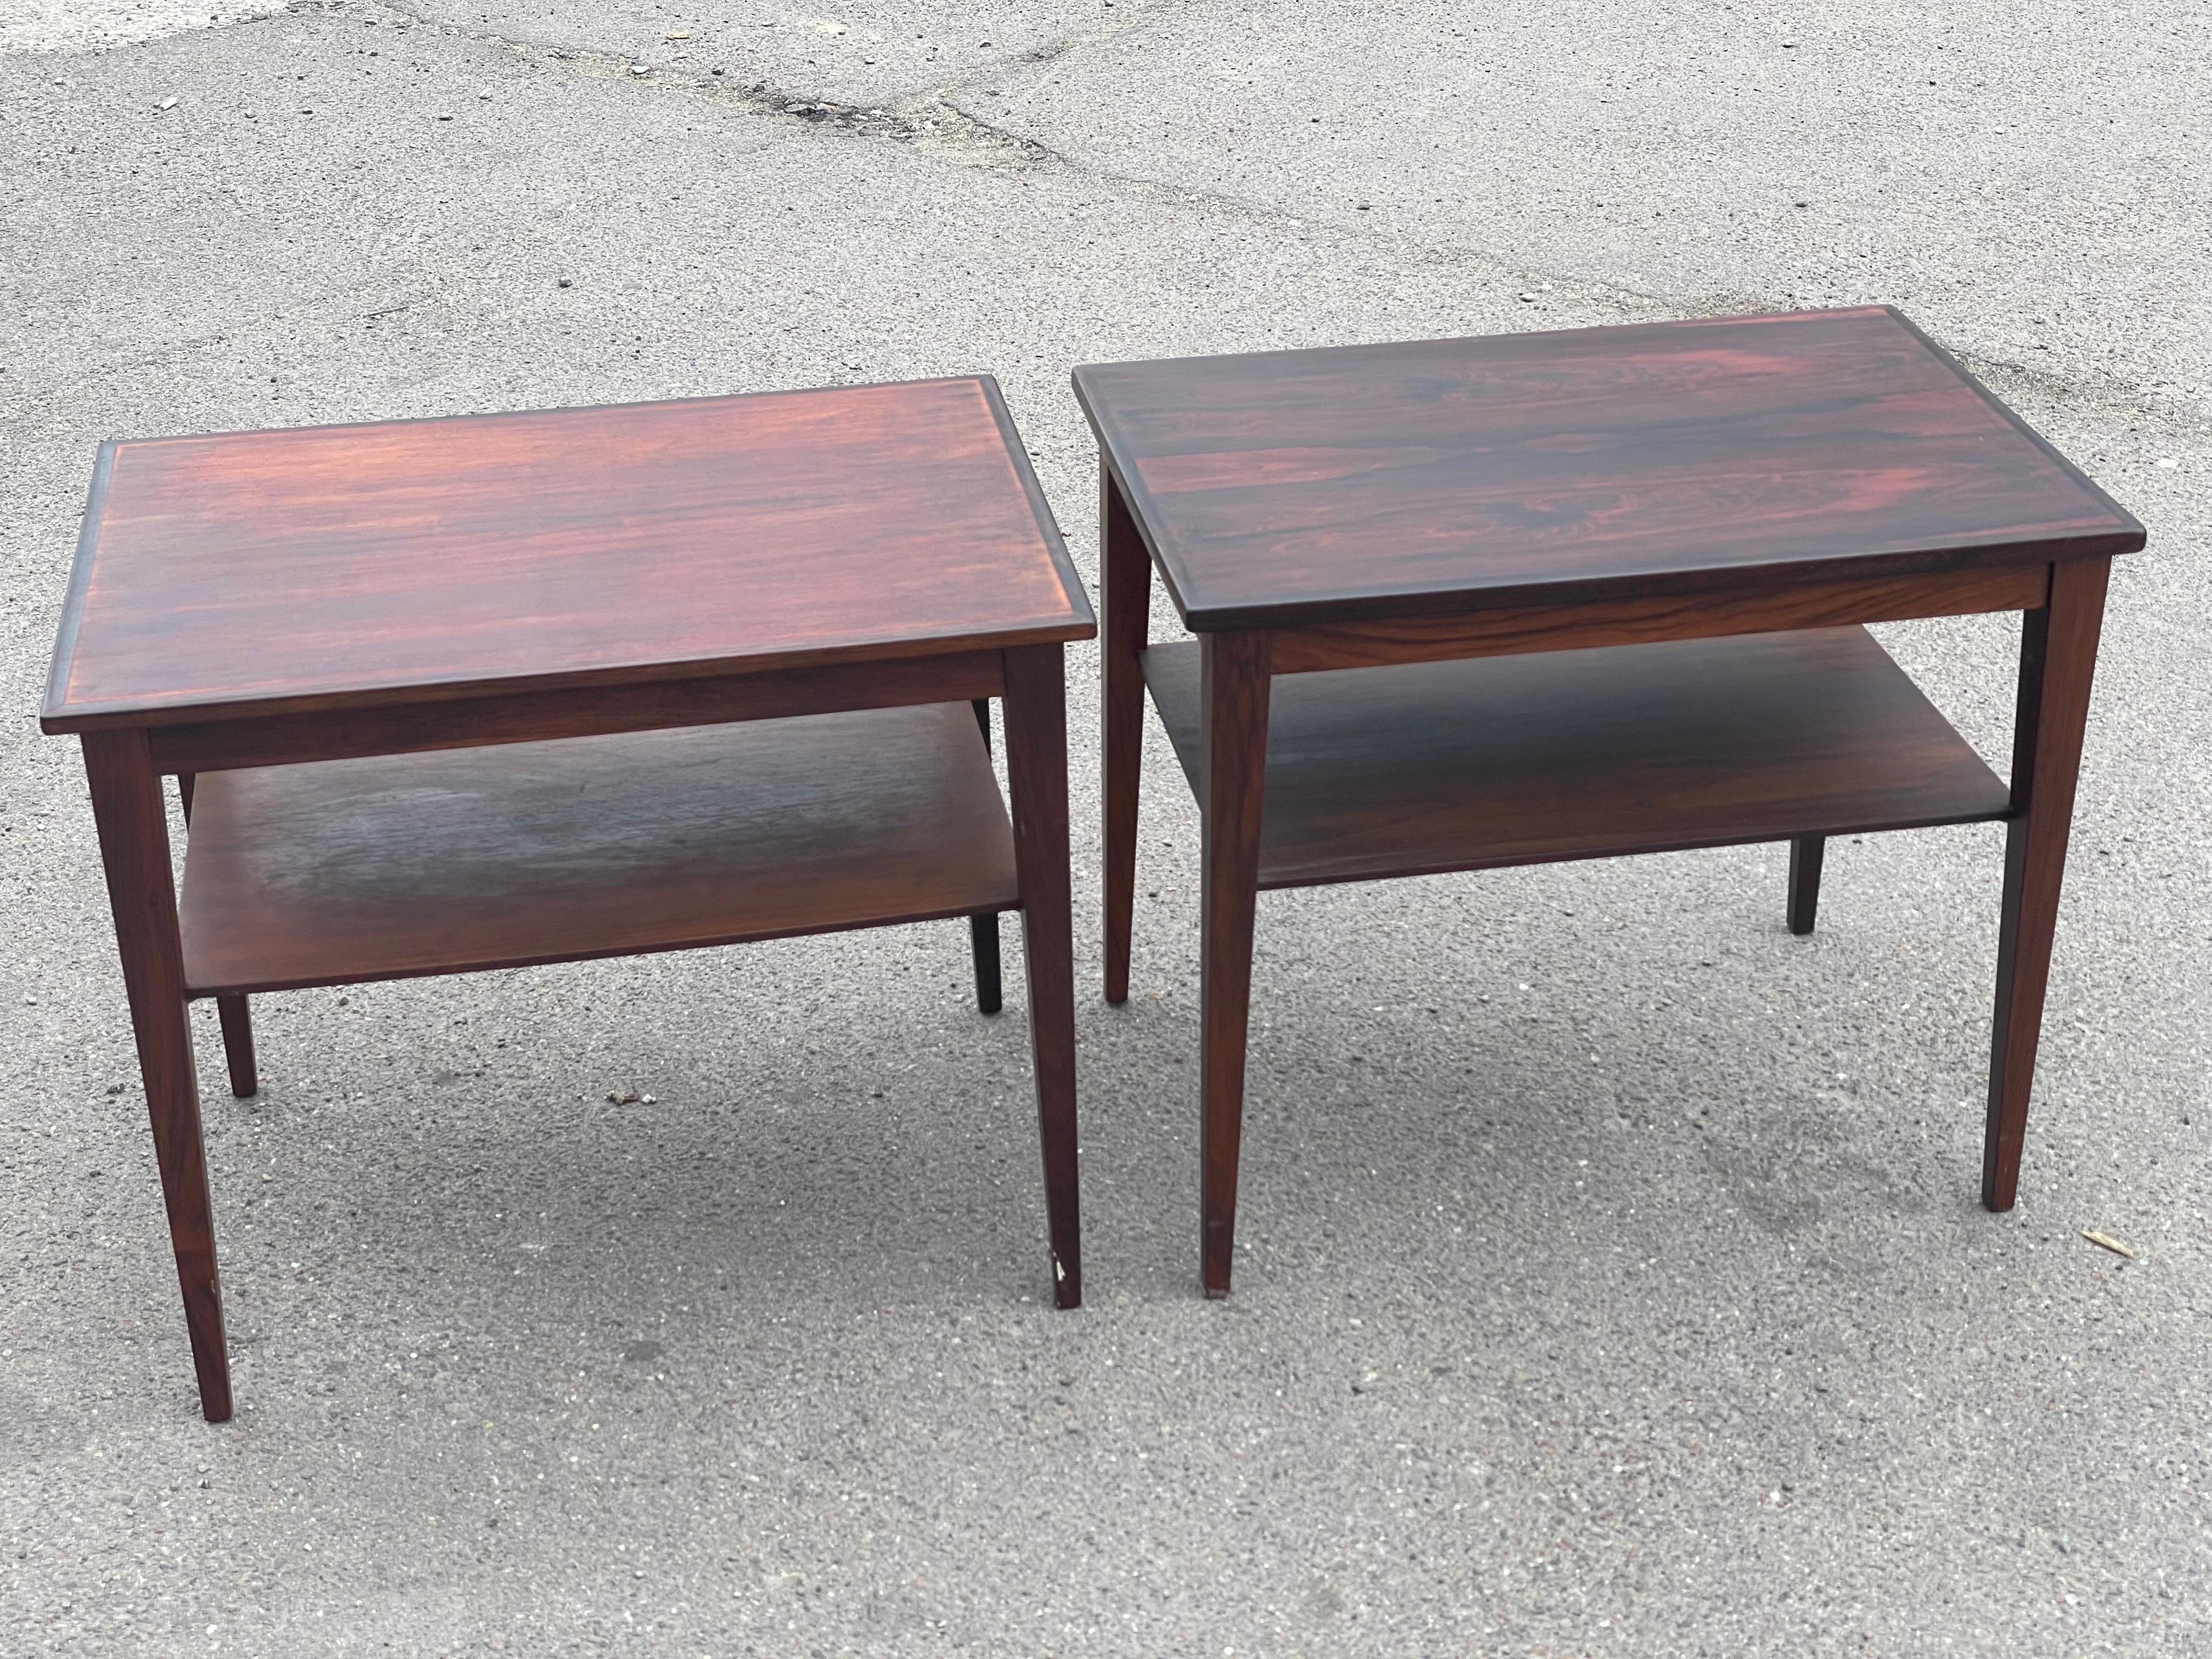 Mid-20th Century Pair of Danish Mid-Century Modern Nightstands or Sidetables from the, 1960s For Sale